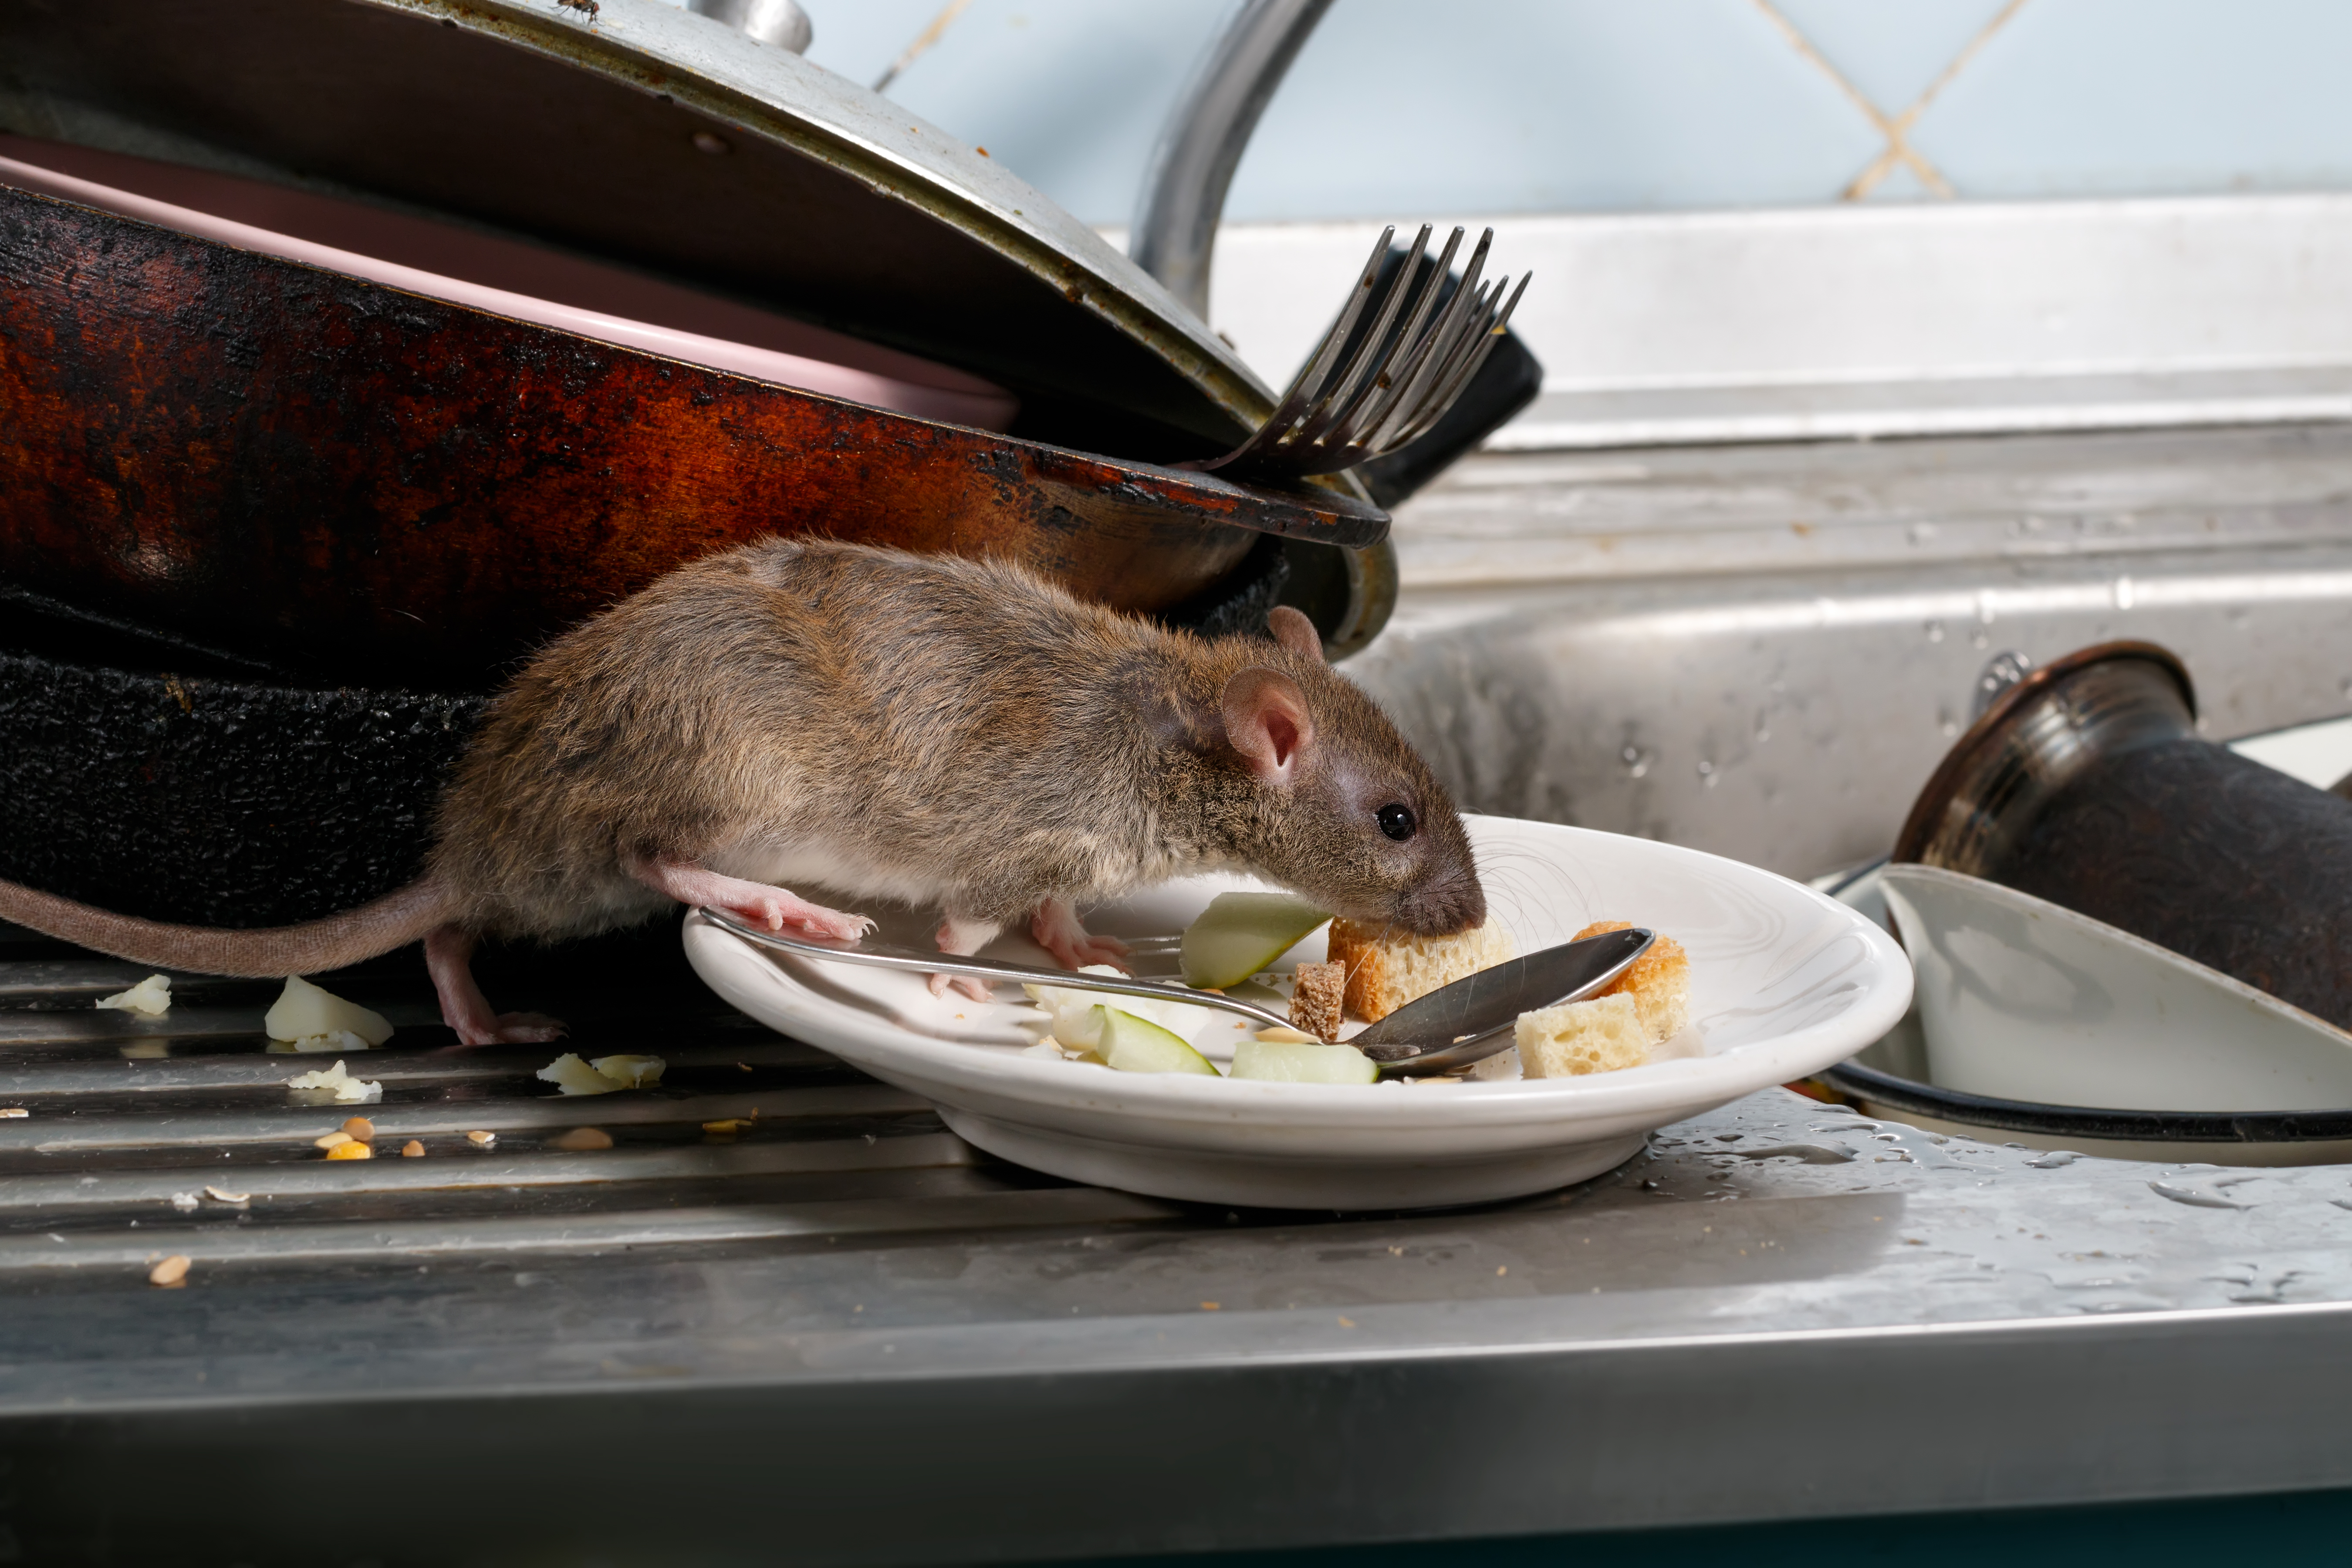 Rat and Food. Shutterstock